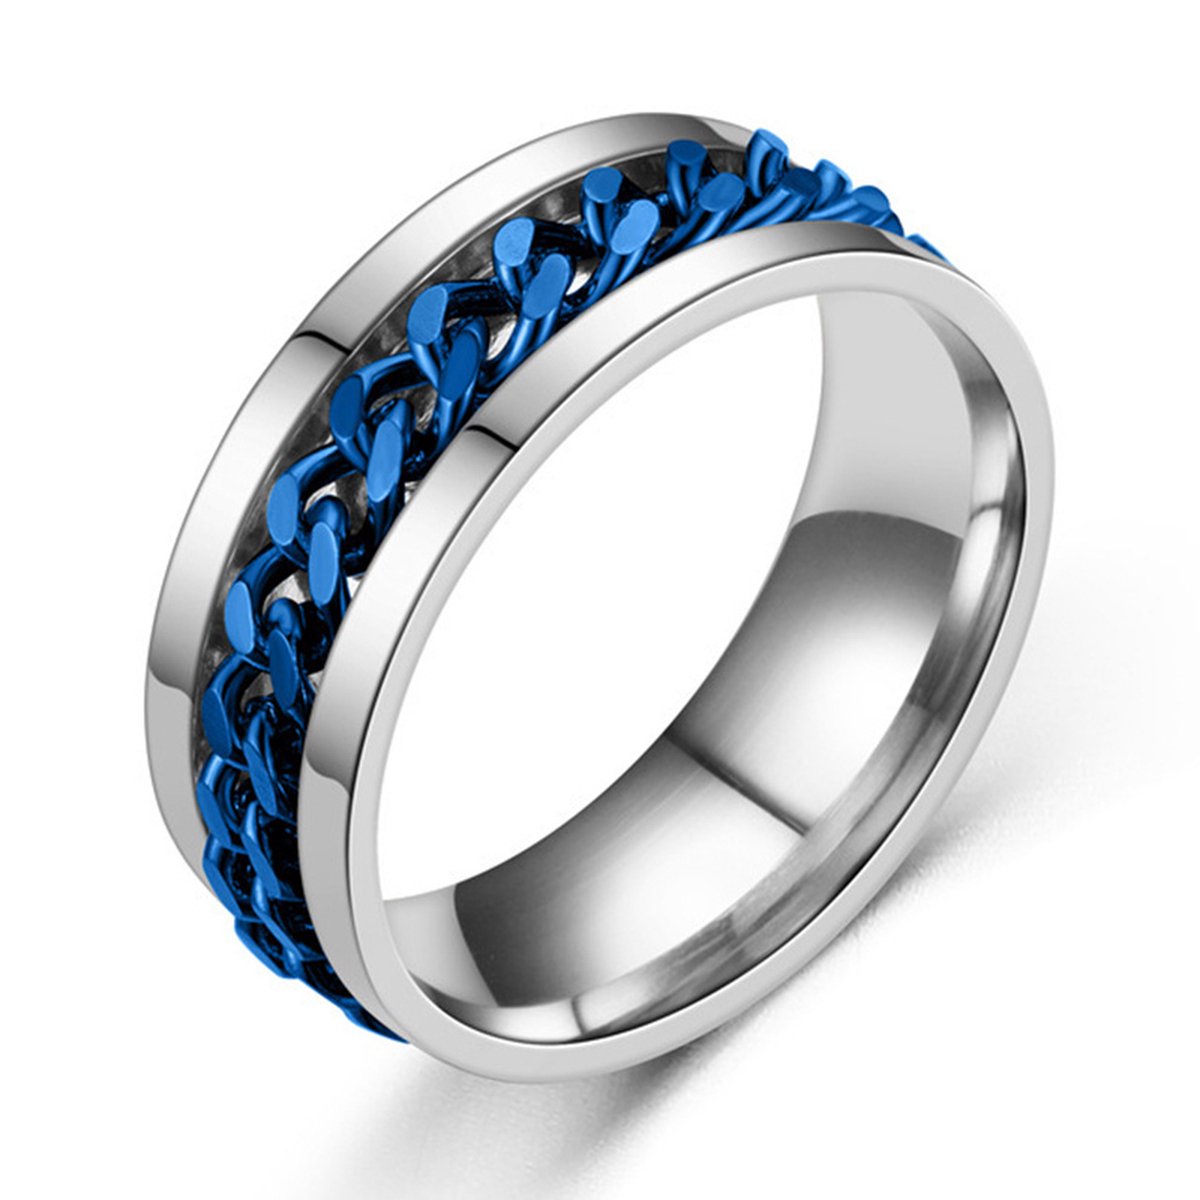 Fidget Ring Zilver - Blauw (Maat 57 - 18 mm - 18.2 mm) - Anxiety Ring - Angst Ring - Stress Ring Heren / Dames - Spinning Ring - Draai Ring - Zilver Roestvrij Staal - Spinner Ring